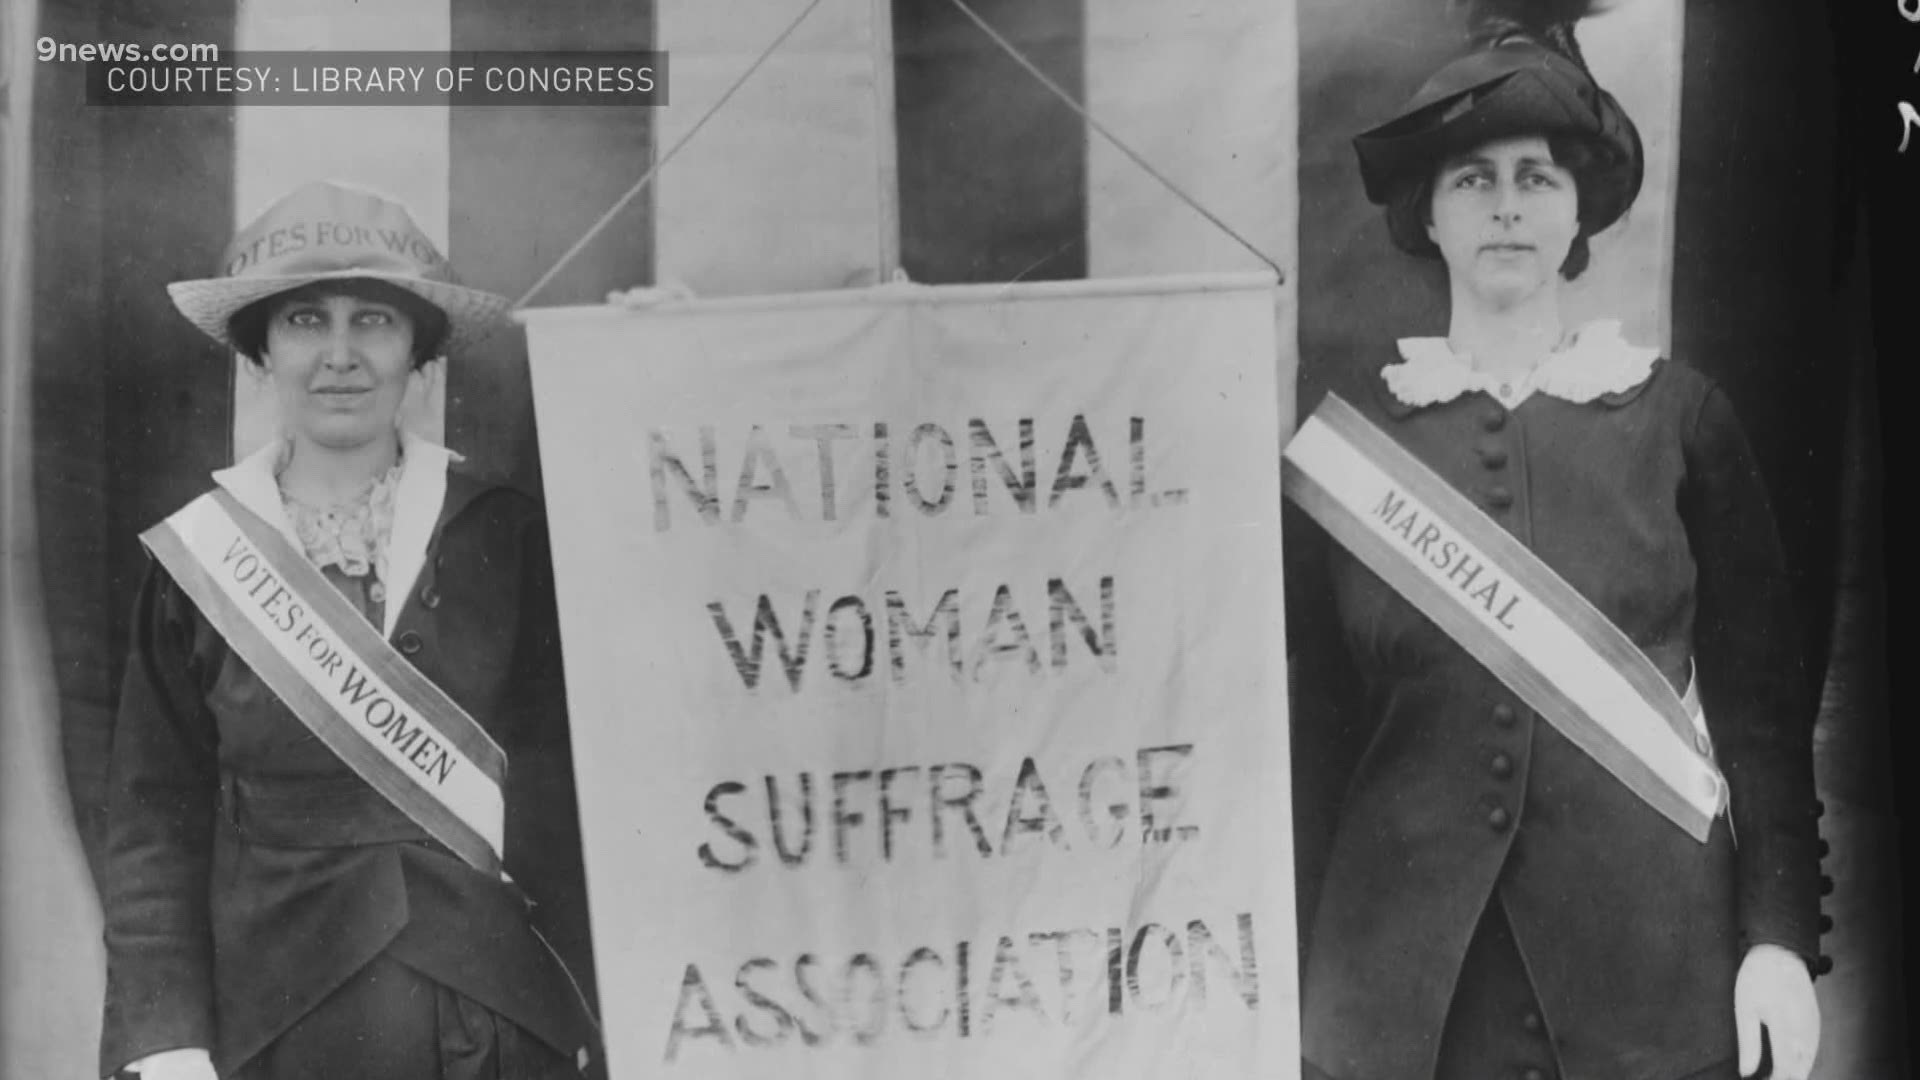 In 1973, Aug. 26 was designated Women's Equality Day. Today, we celebrate 100 years since the ratification of the 19th amendment.